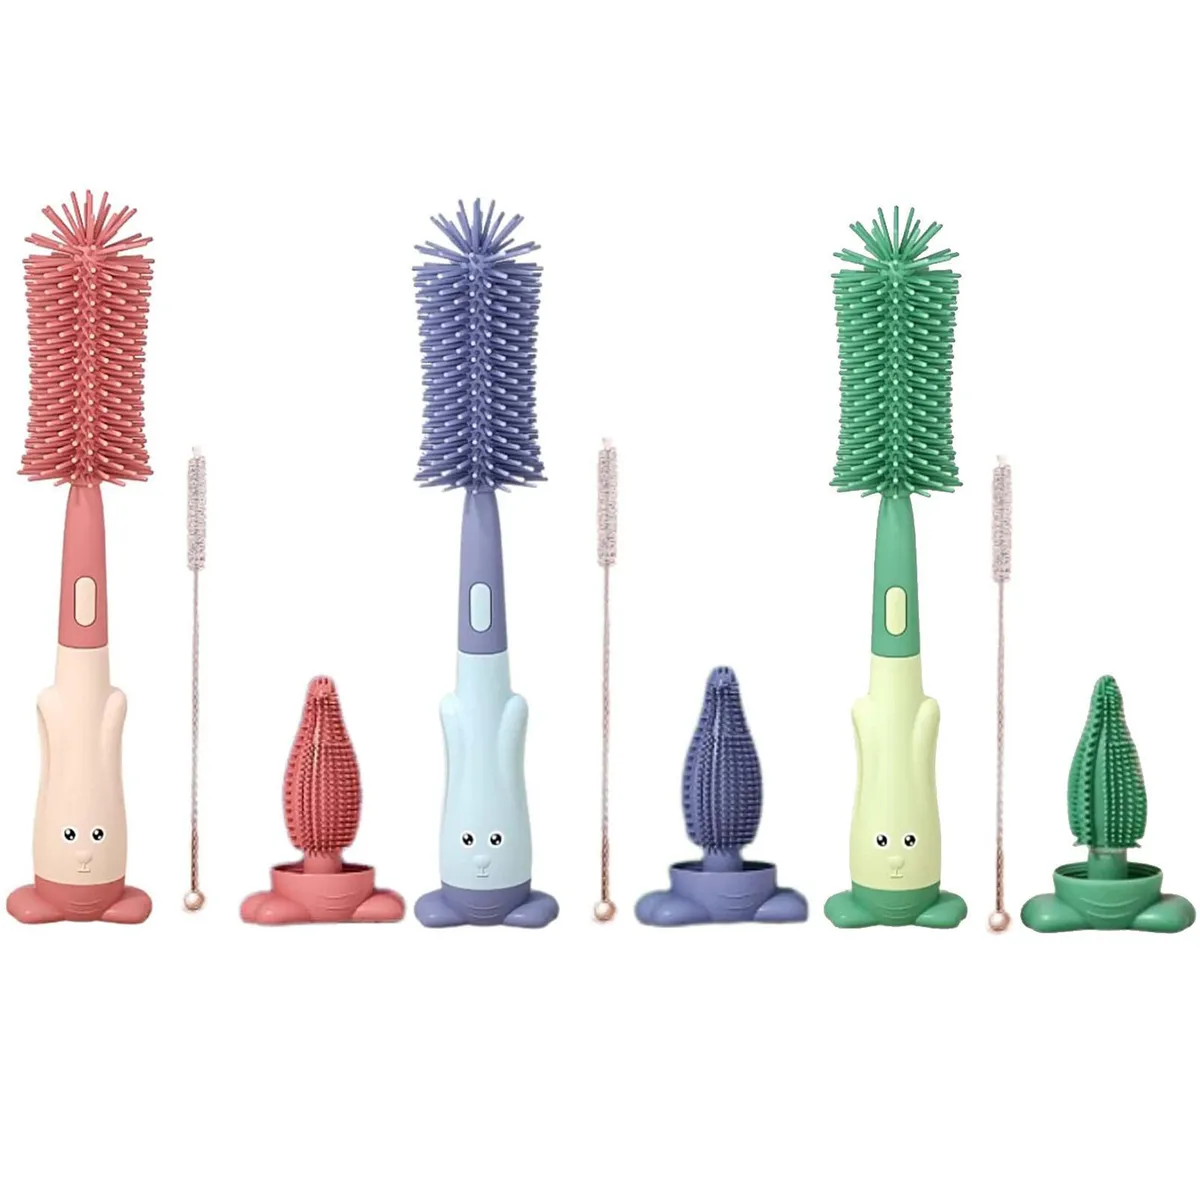 3 in 1 Multi Functional Silicone Bottle Cleaning Brush Kit with